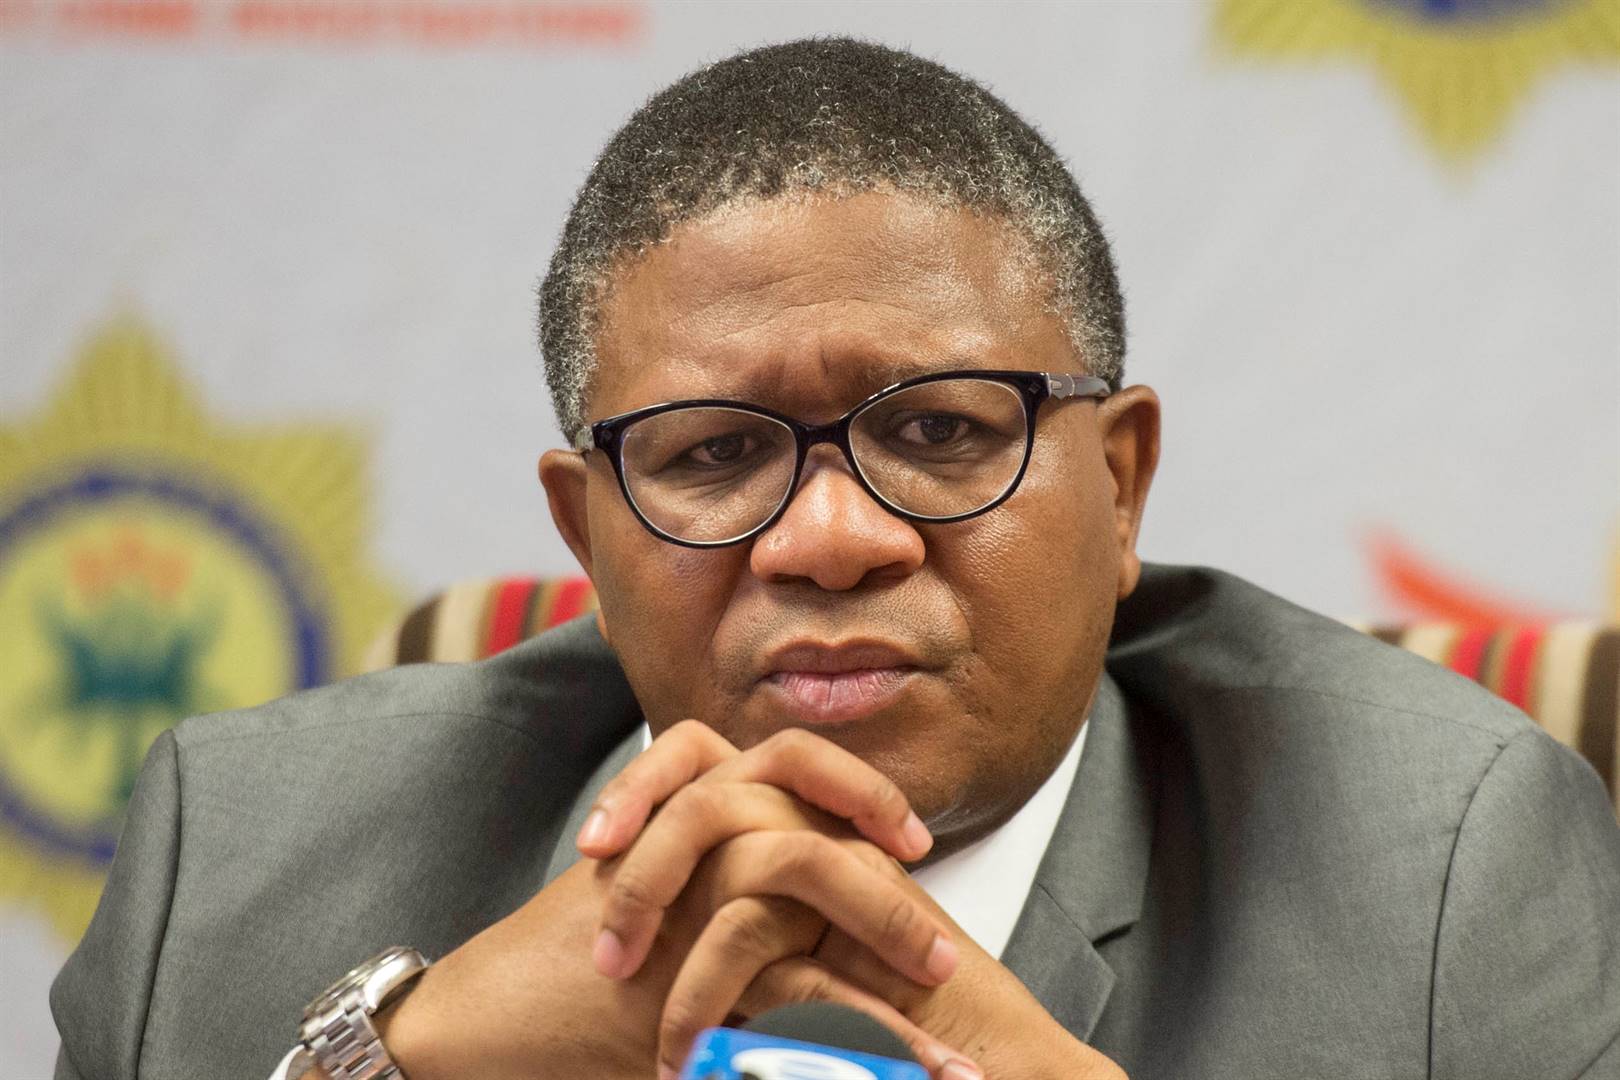 Mbalula said that since the accident, they had visited the bereaved families and know that almost all the people who died were the breadwinners. Photo: Deaan Vivier